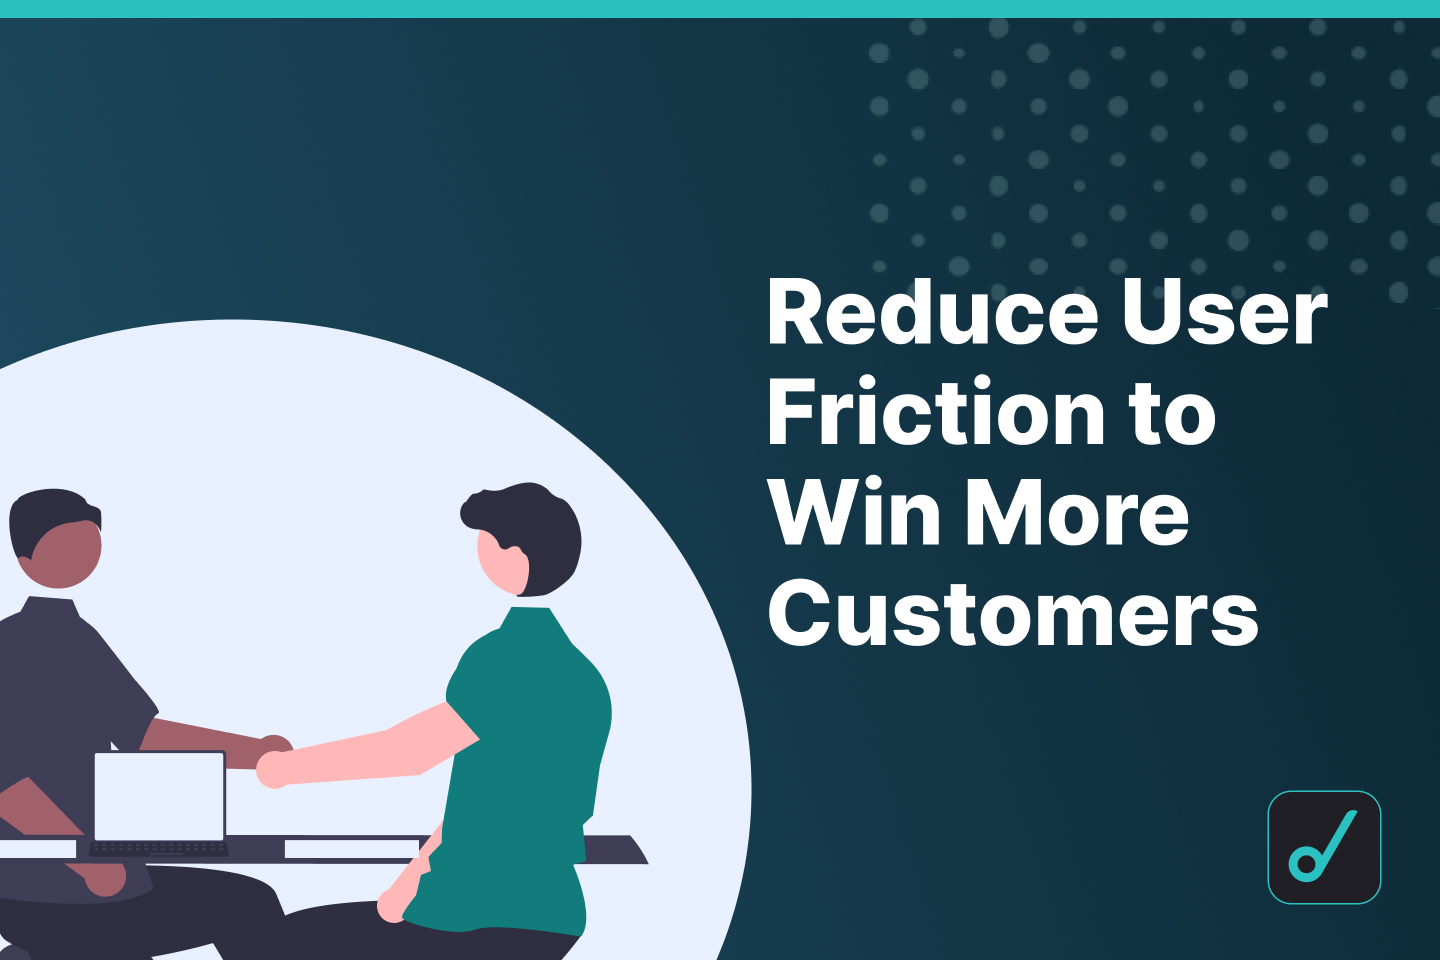 How to Win More Customers by Reducing User Friction